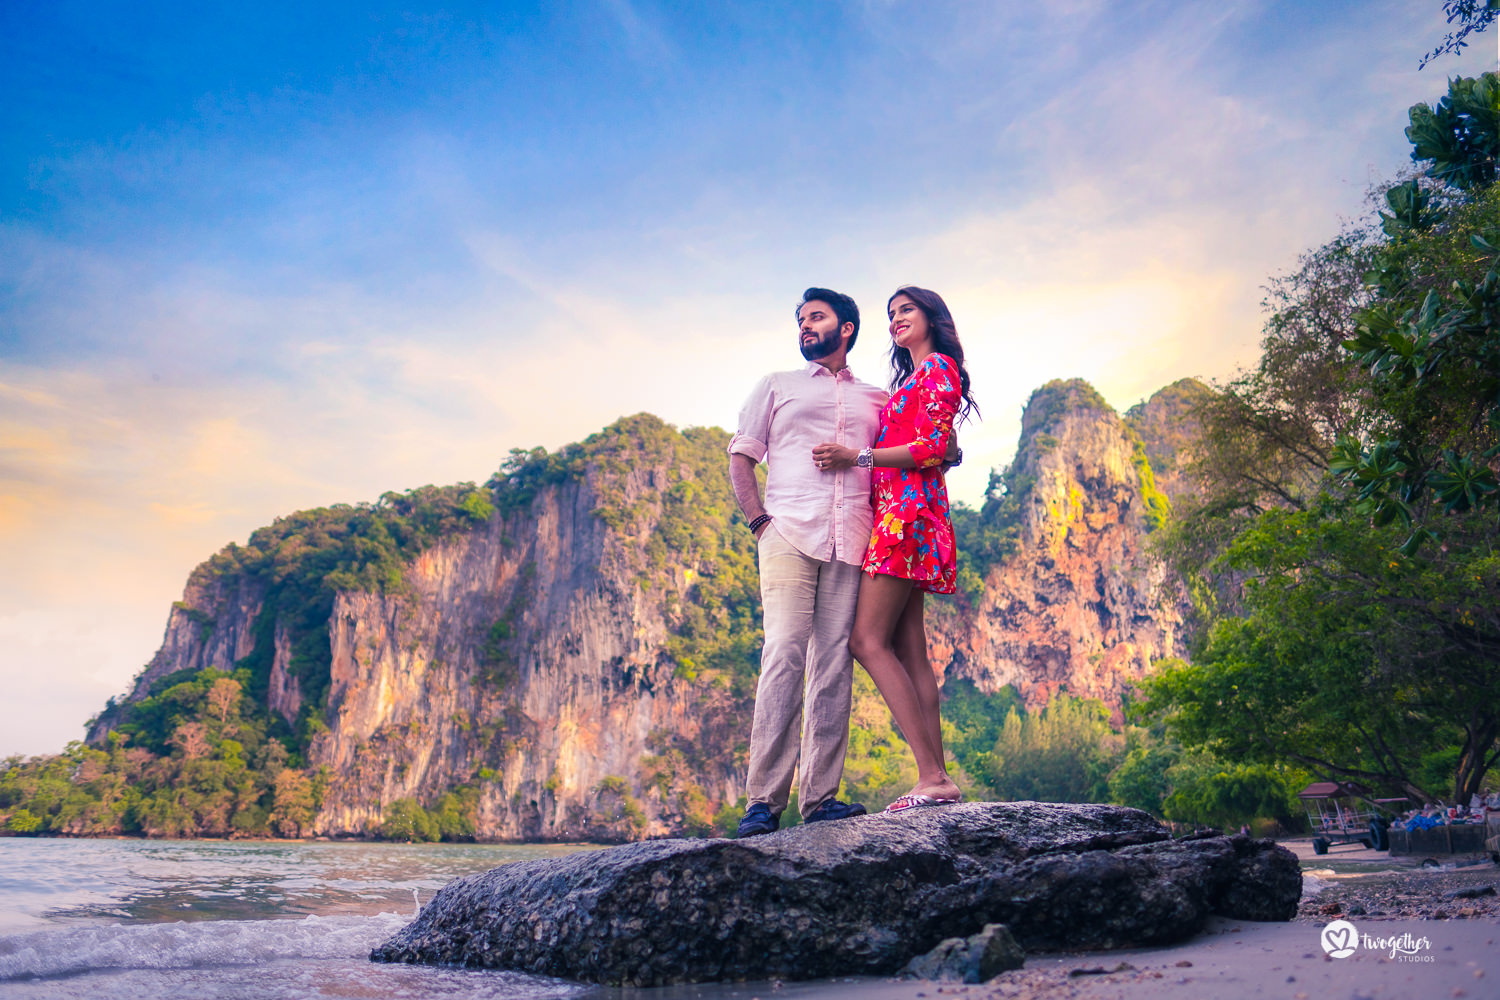 13+ Poses Ideas For Pre Wedding Photoshoot You Need To Know